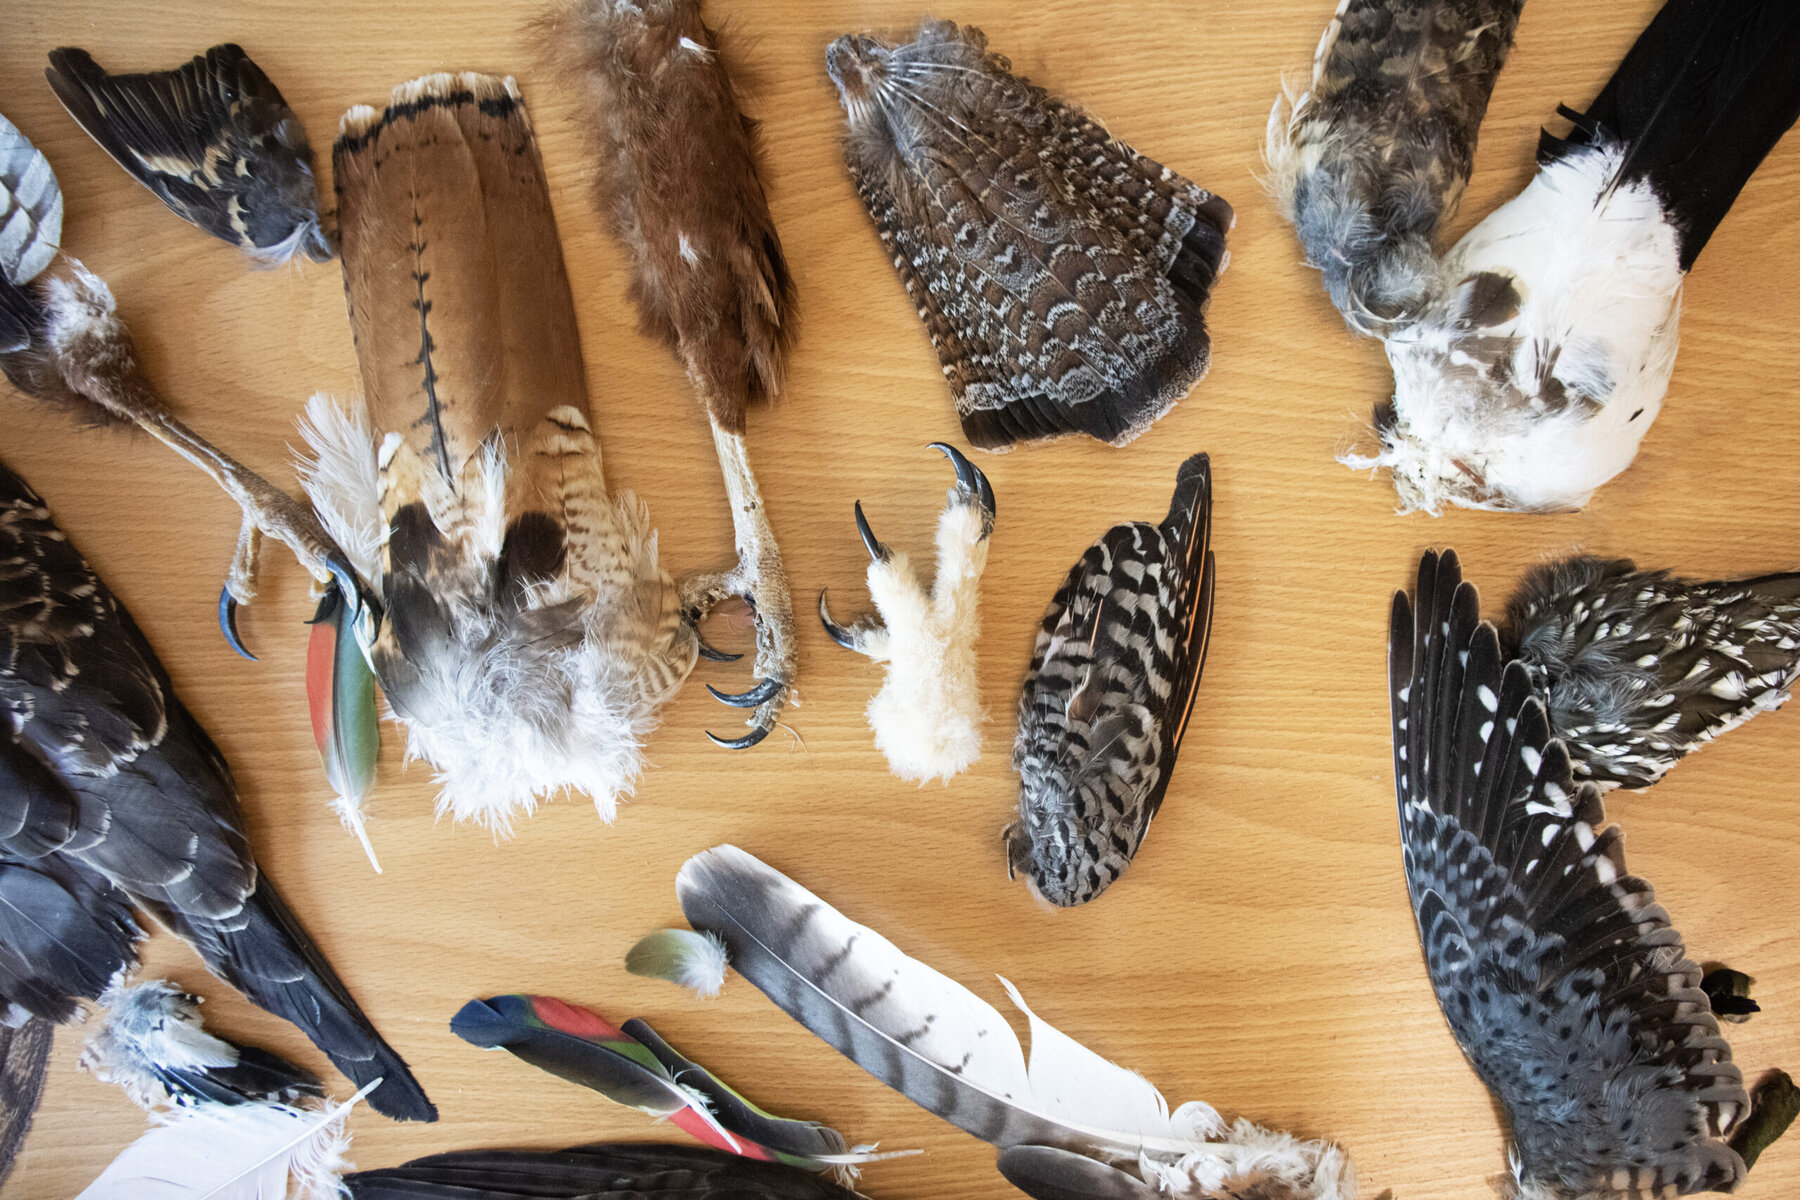 Feathers and bird parts are spread out on a table.